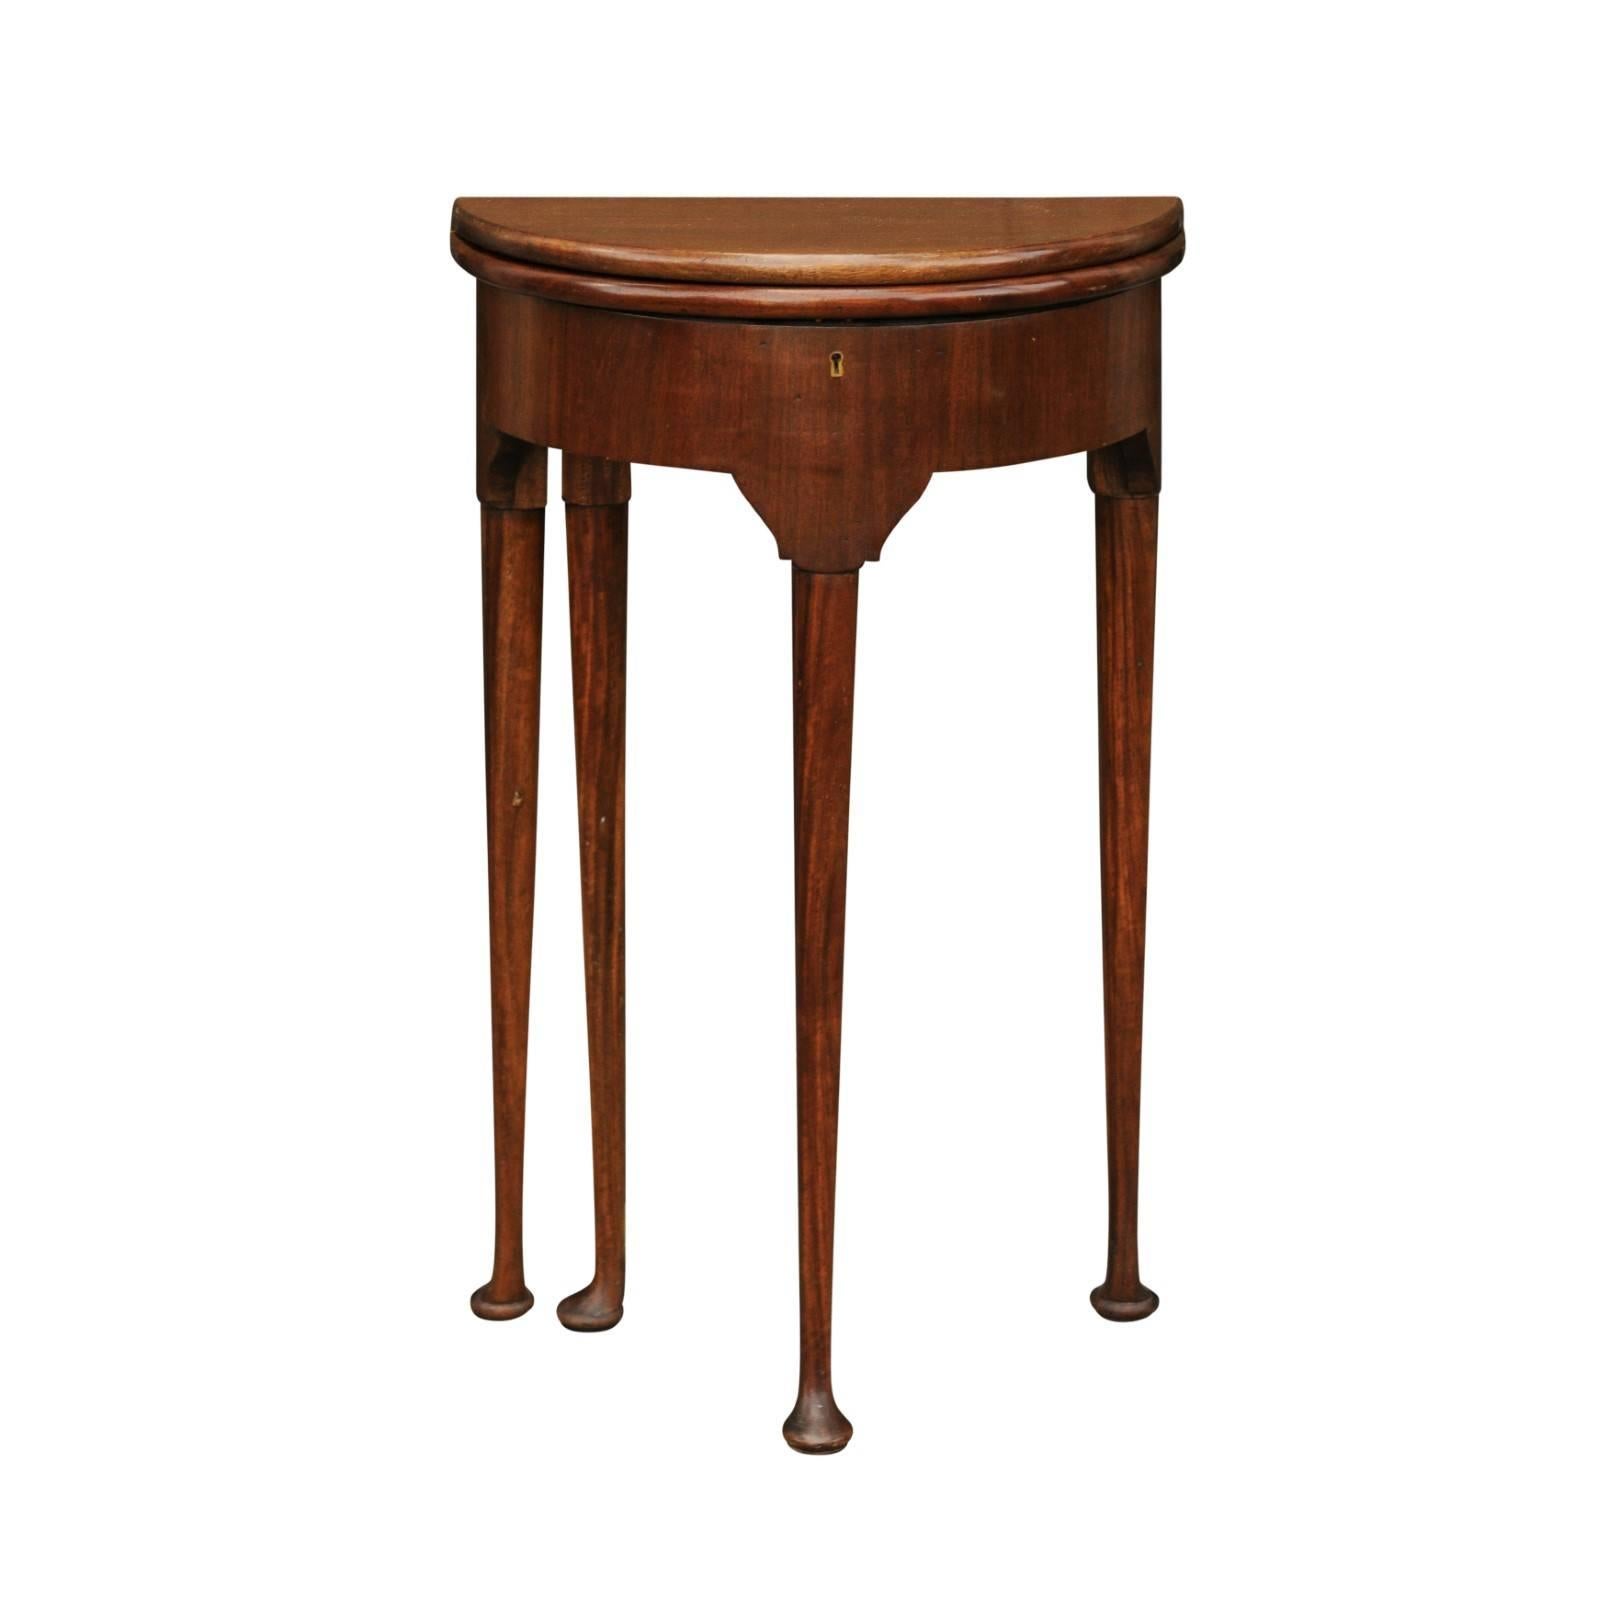 English George III Style 1850s Petite Mahogany Demilune Table with Lift Top